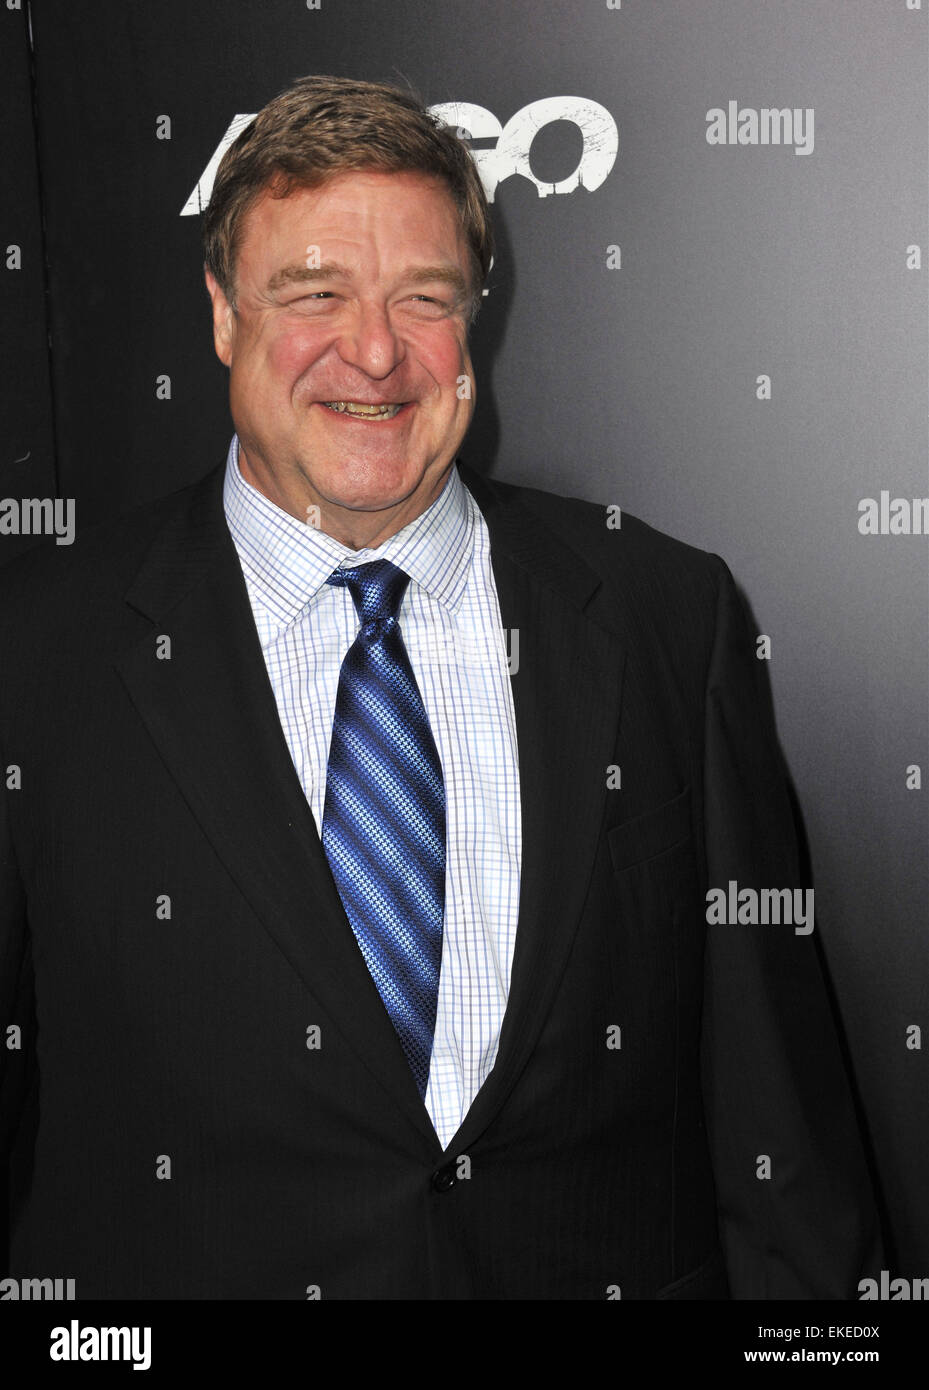 BEVERLY HILLS, CA - OCTOBER 4, 2012: John Goodman at the Los Angeles premiere of his movie 'Argo' at the Samuel Goldwyn Theatre, Beverly Hills. Stock Photo